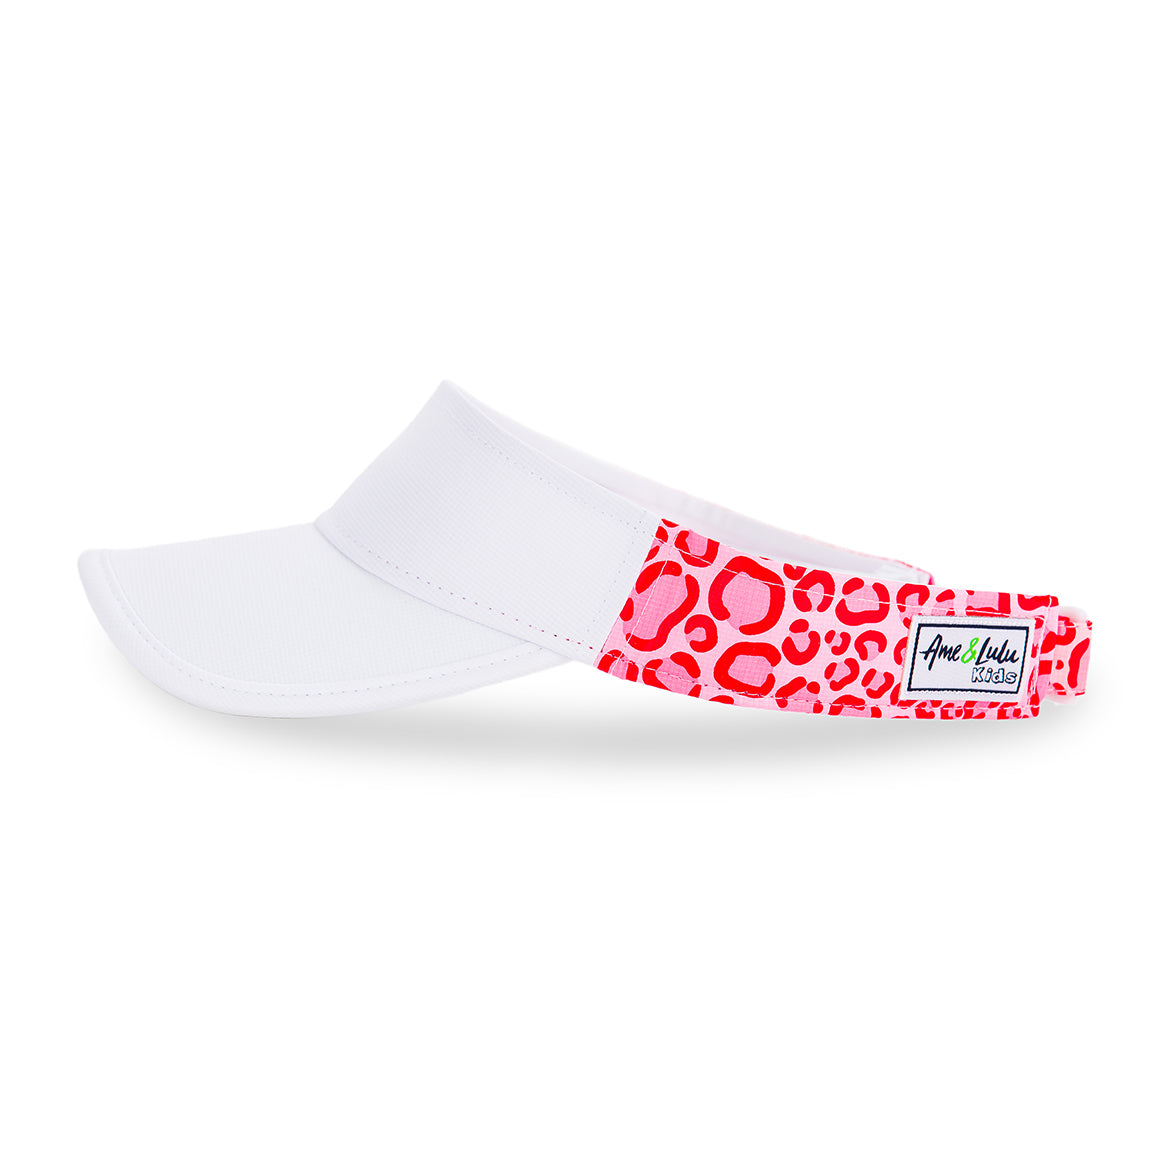 Side view of hot pink and red leopard pattern kids visor.